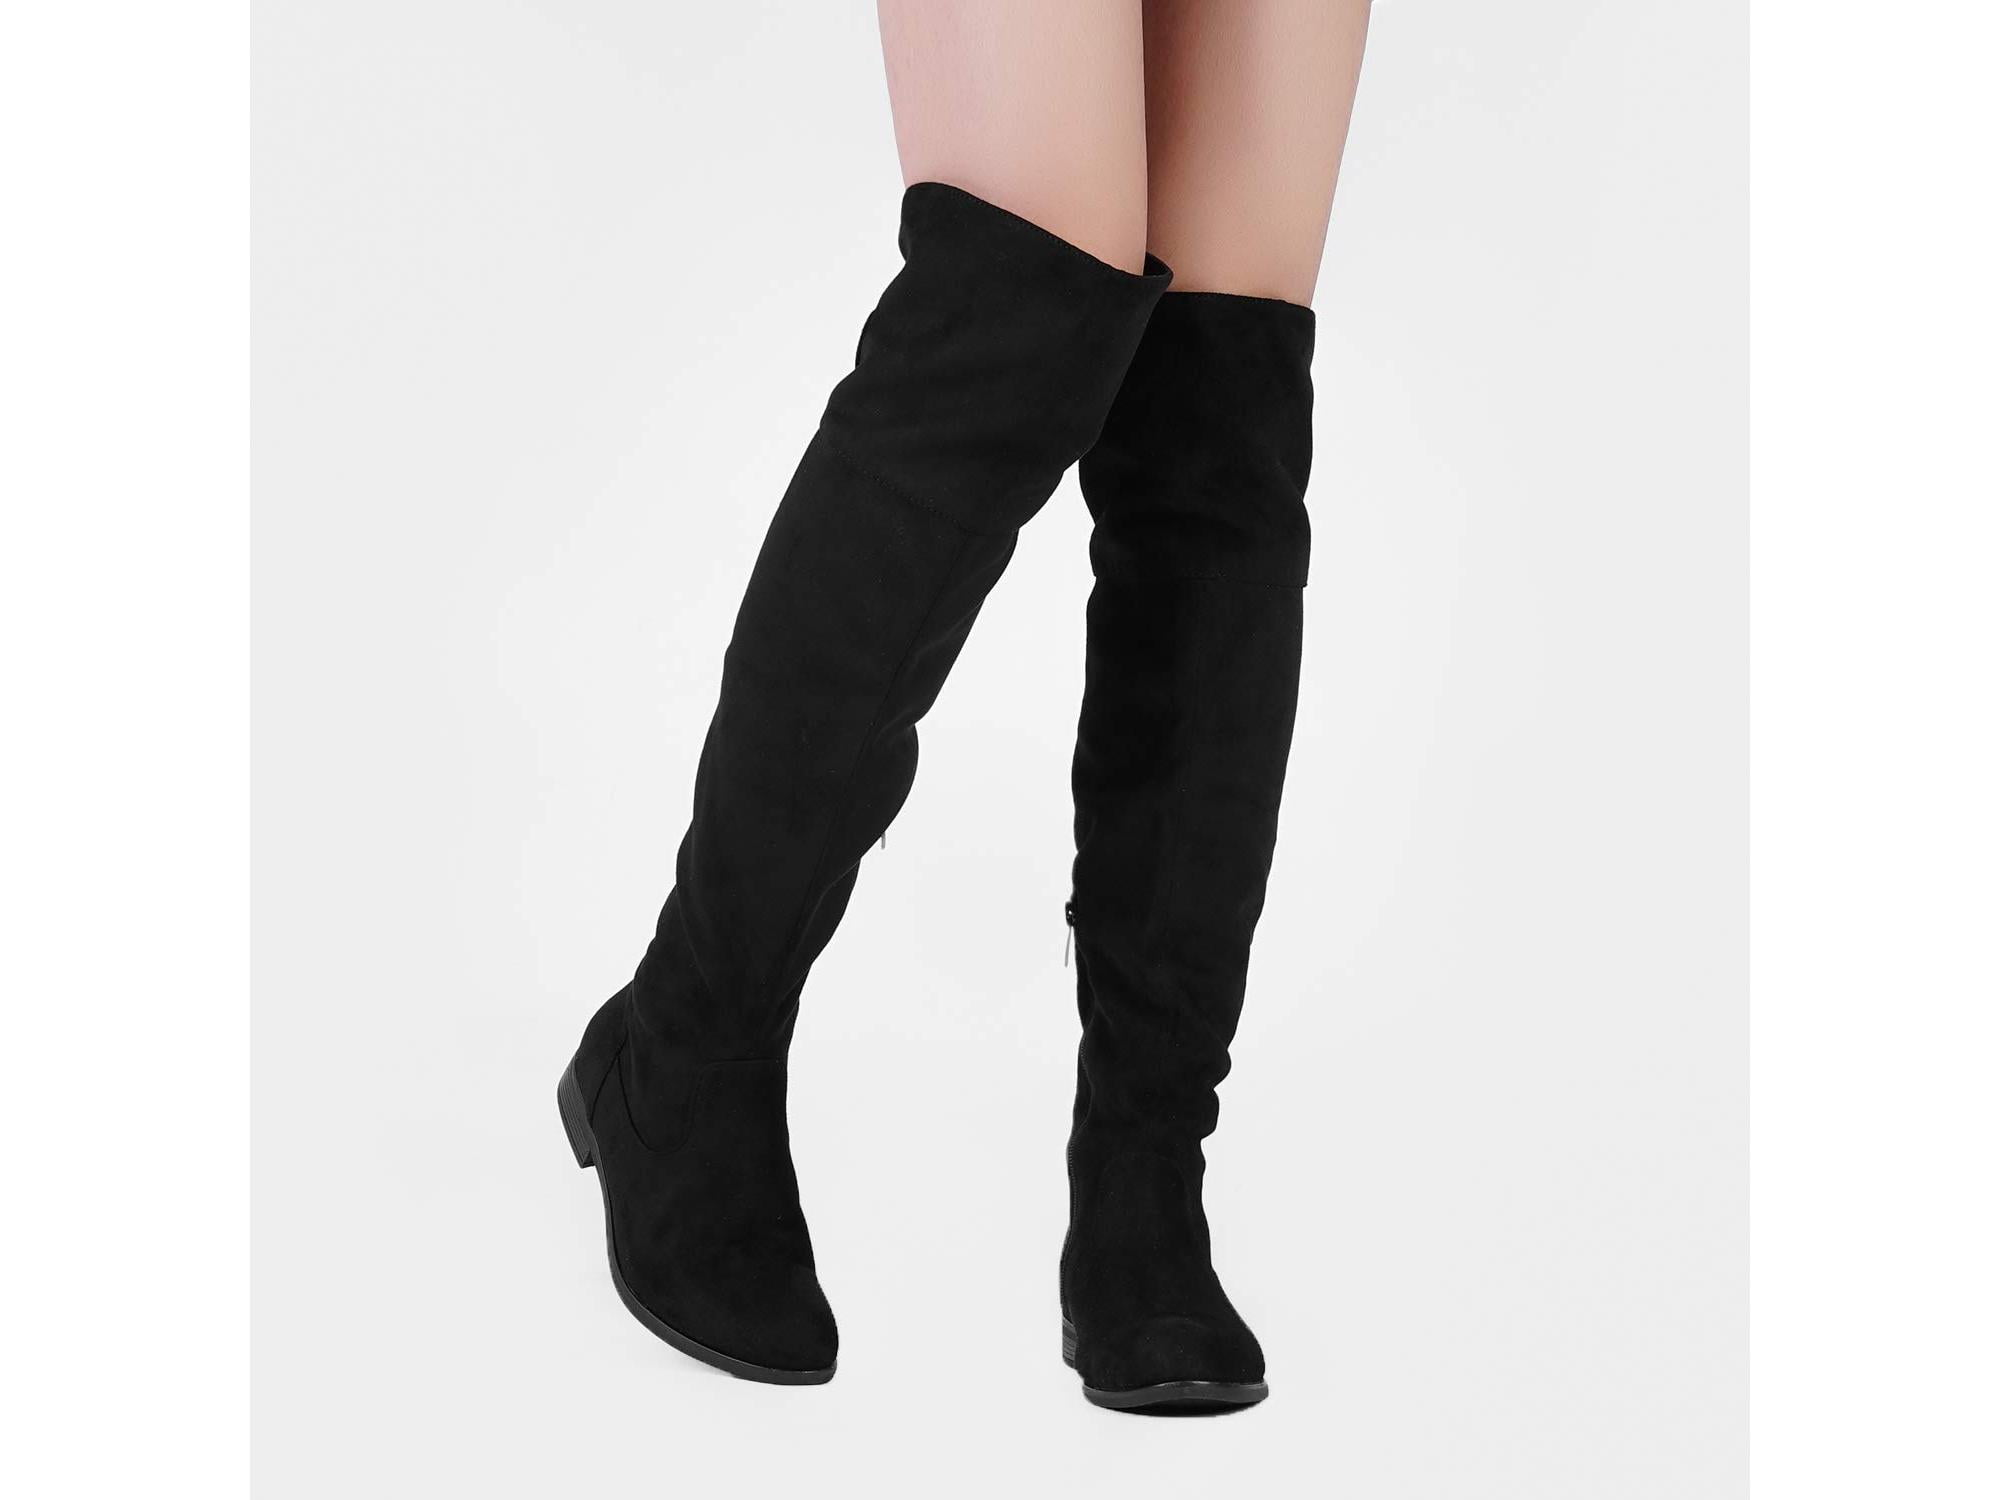 DREAM PAIRS Womens Thigh High Fashion Boots Over The Knee Block Heel Boots 